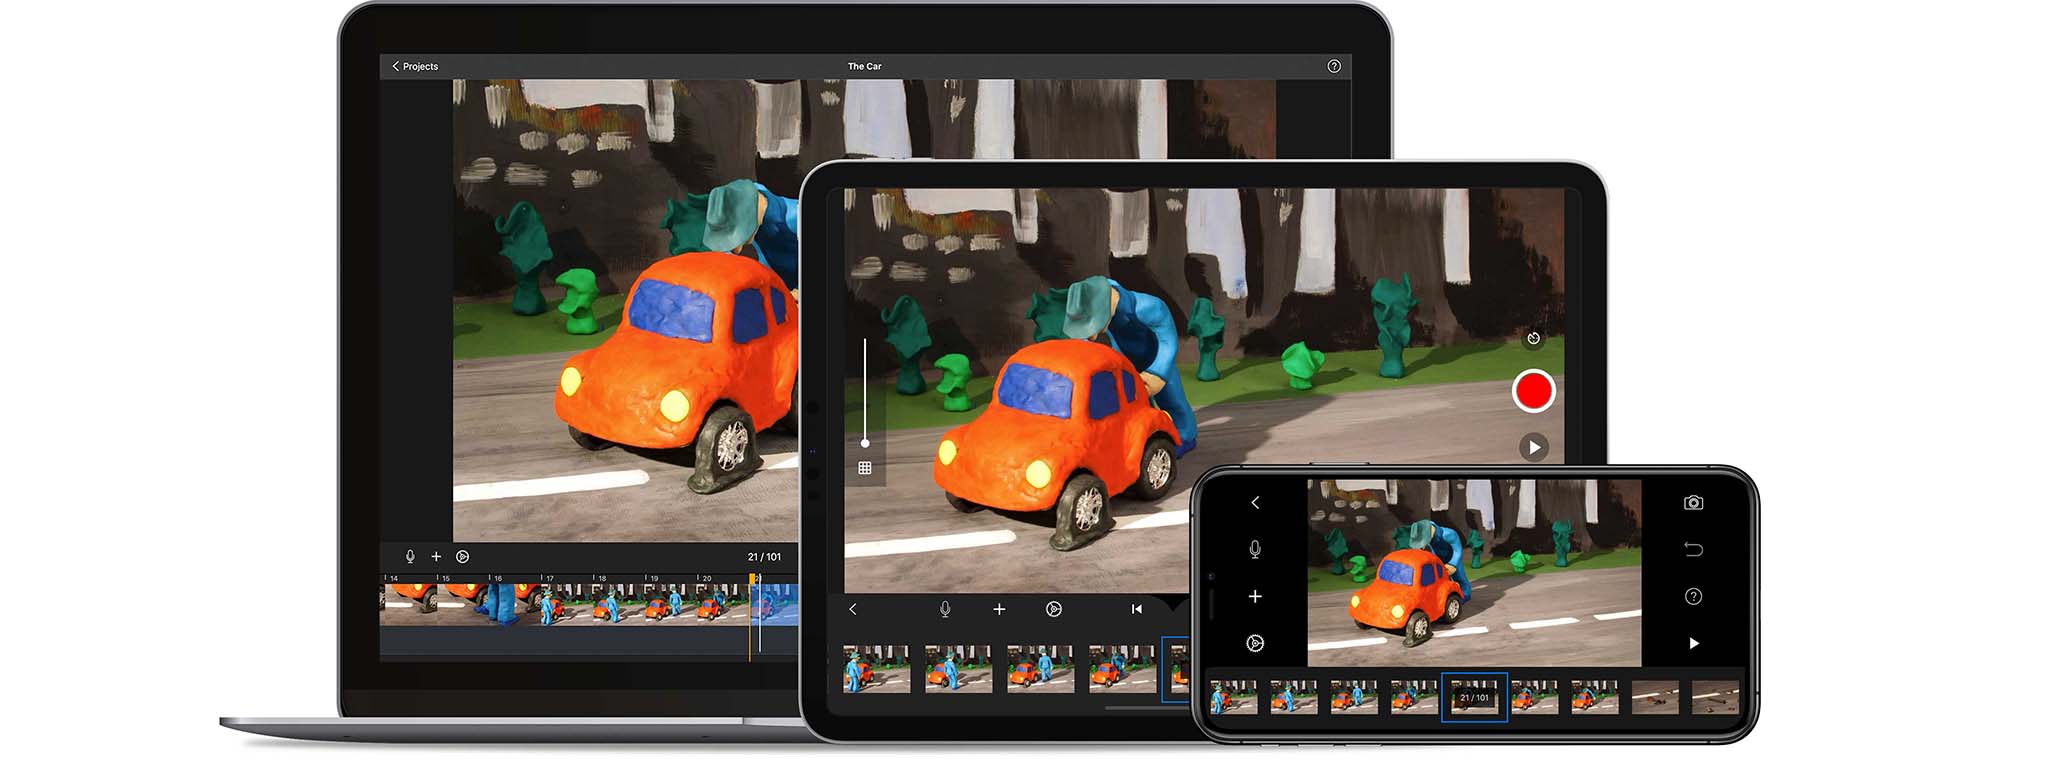 Stop Motion Studio - Animation App for Mobile and Desktop